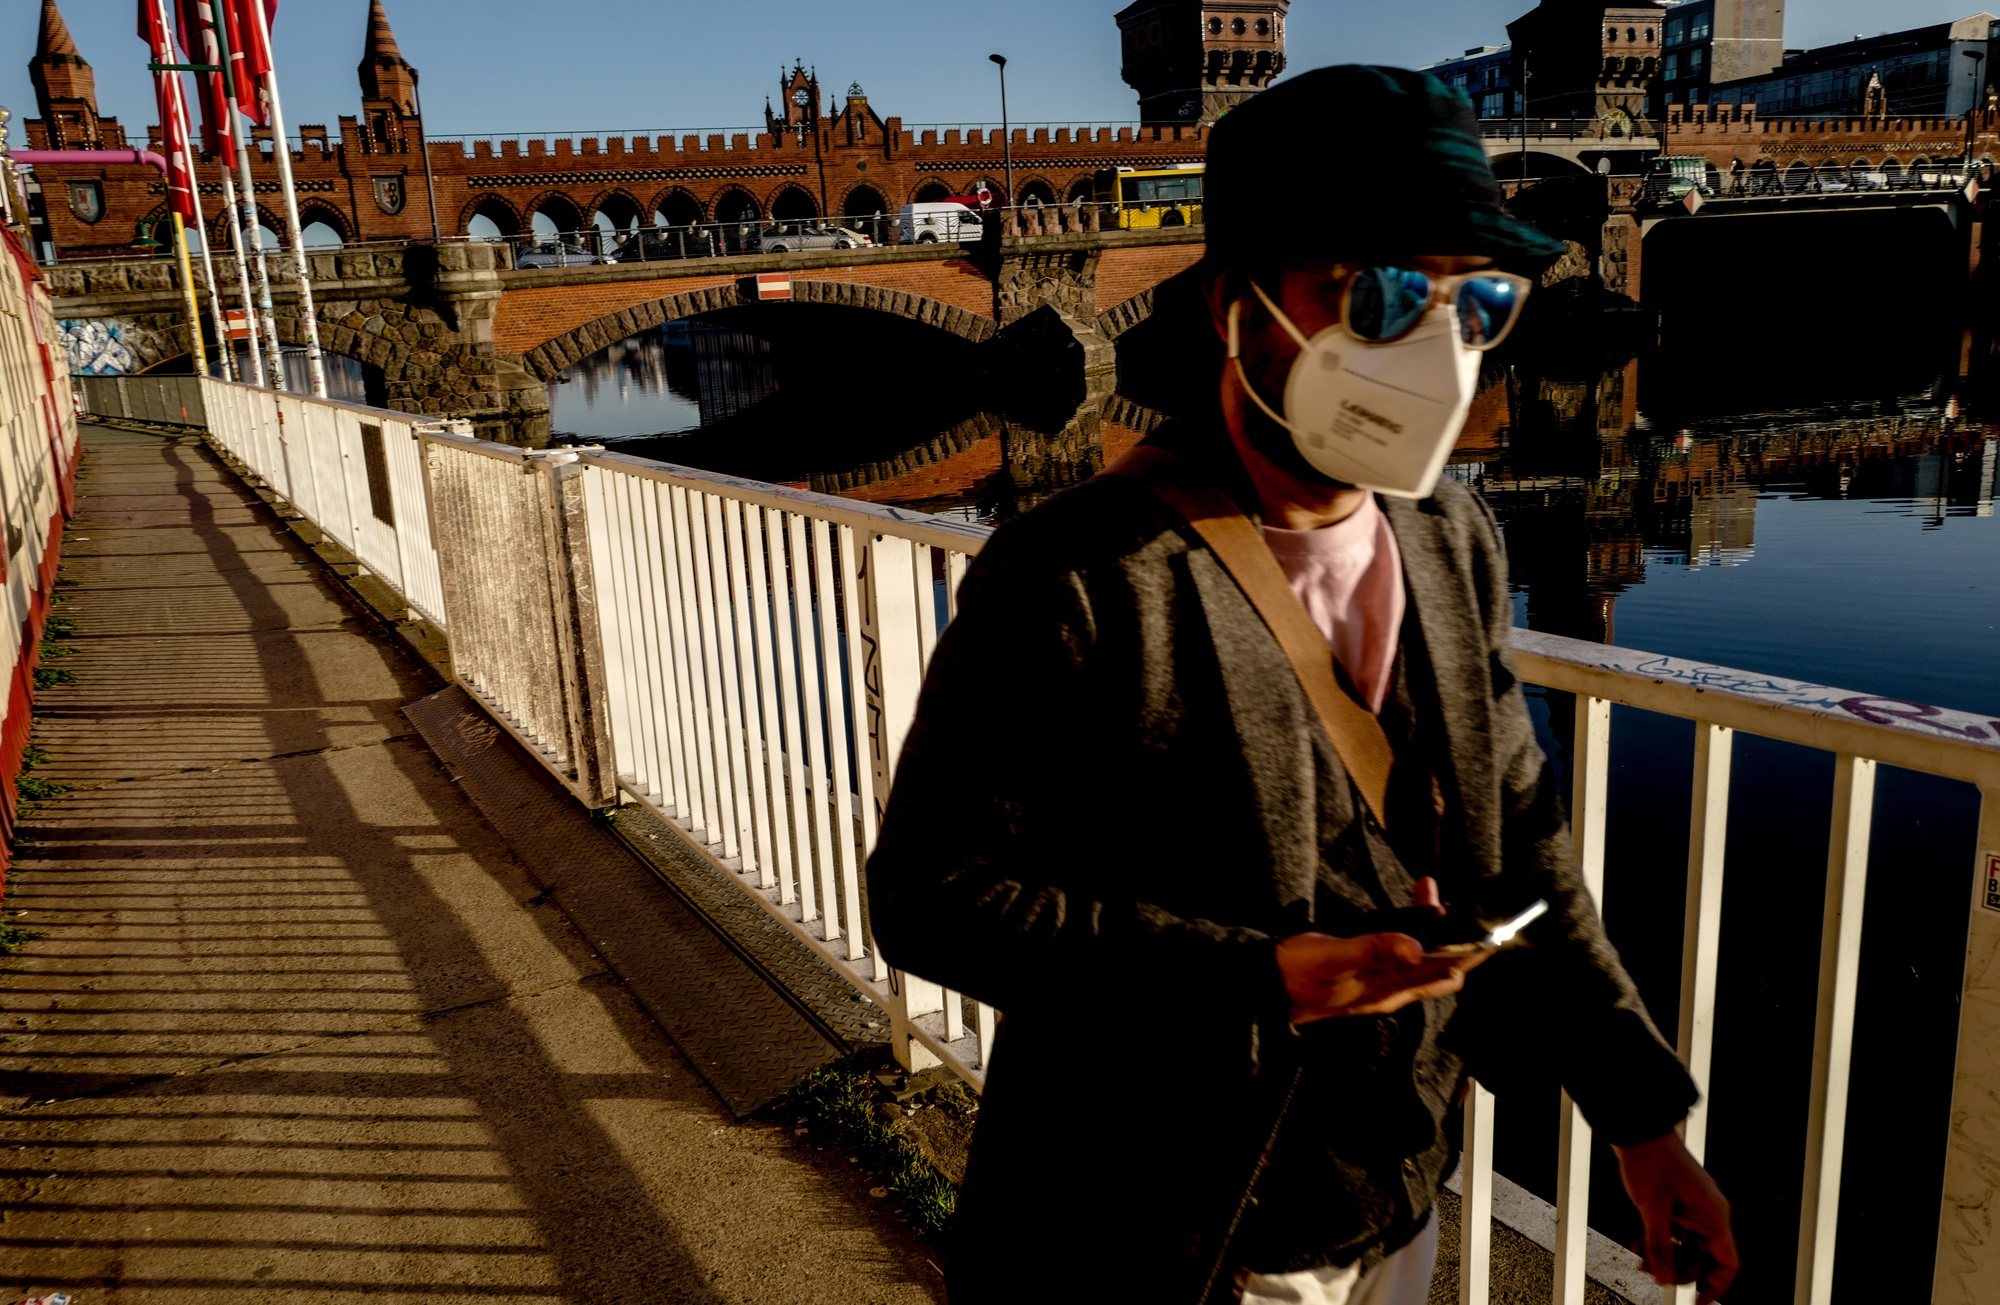 epa09047111 A man wears mask as walks next to Oberbaum Bridge in Berlin, Germany, 02 March 2021. People in Berlin took the sunny weather with spring-like warm temperatures as an opportunity to go outside during lockdown and to sit in the sun, to run or to stroll. The German Chancellor meets on 03 March the heads of the German regional states at the chancellery to discuss further lockdown measures due to the COVID-19 disease crisis caused by the SARS-CoV-2 coronavirus.  EPA/FILIP SINGER